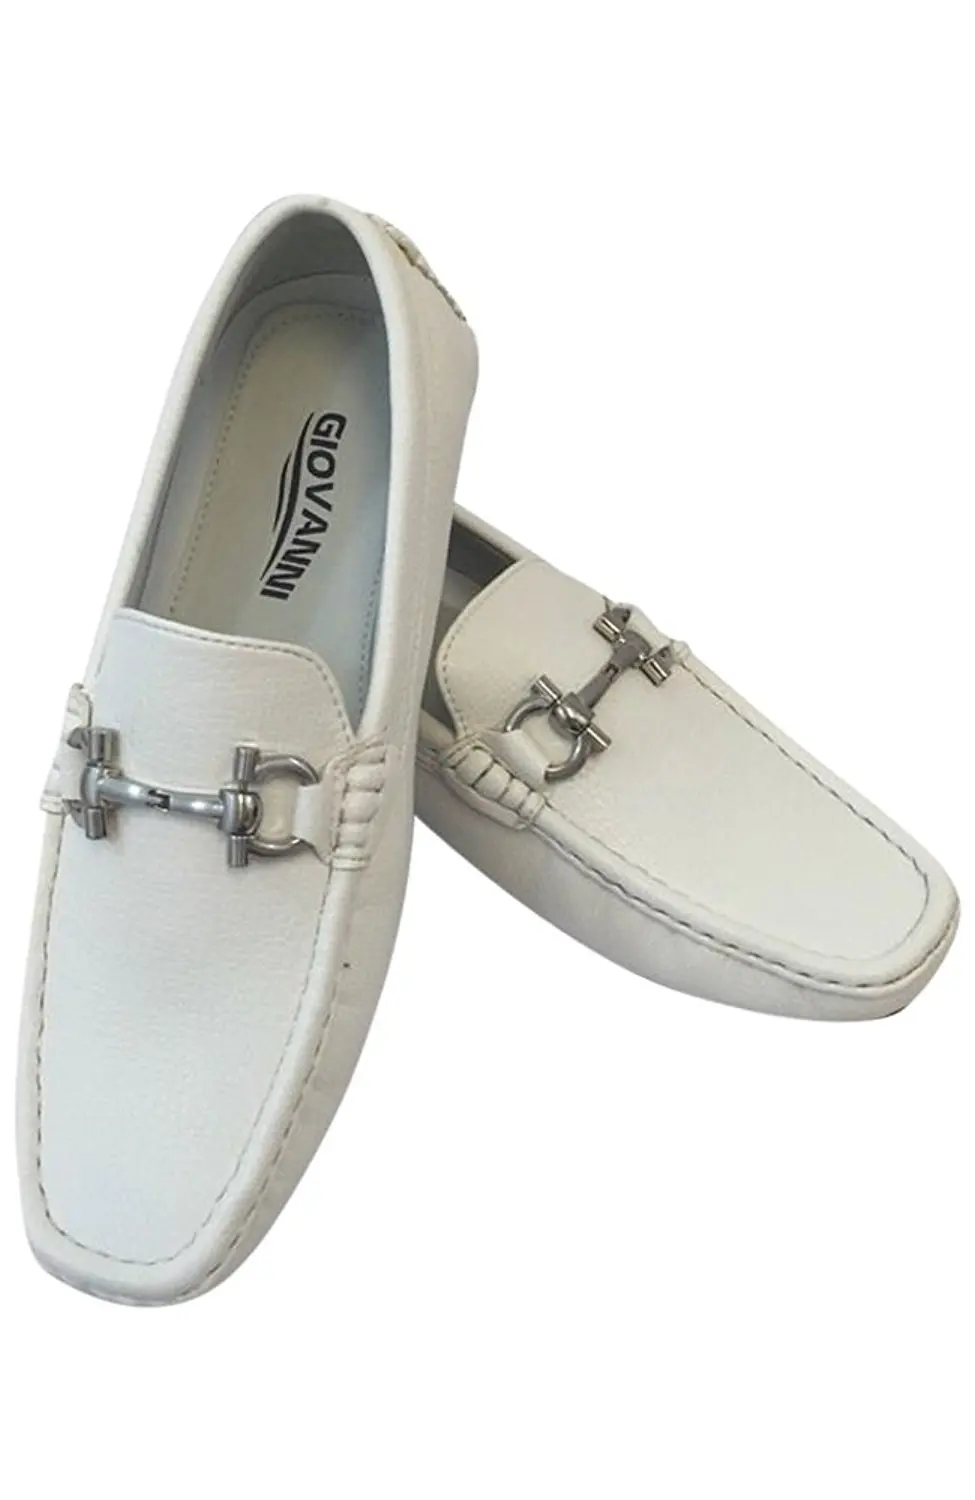 giovanni mens loafers